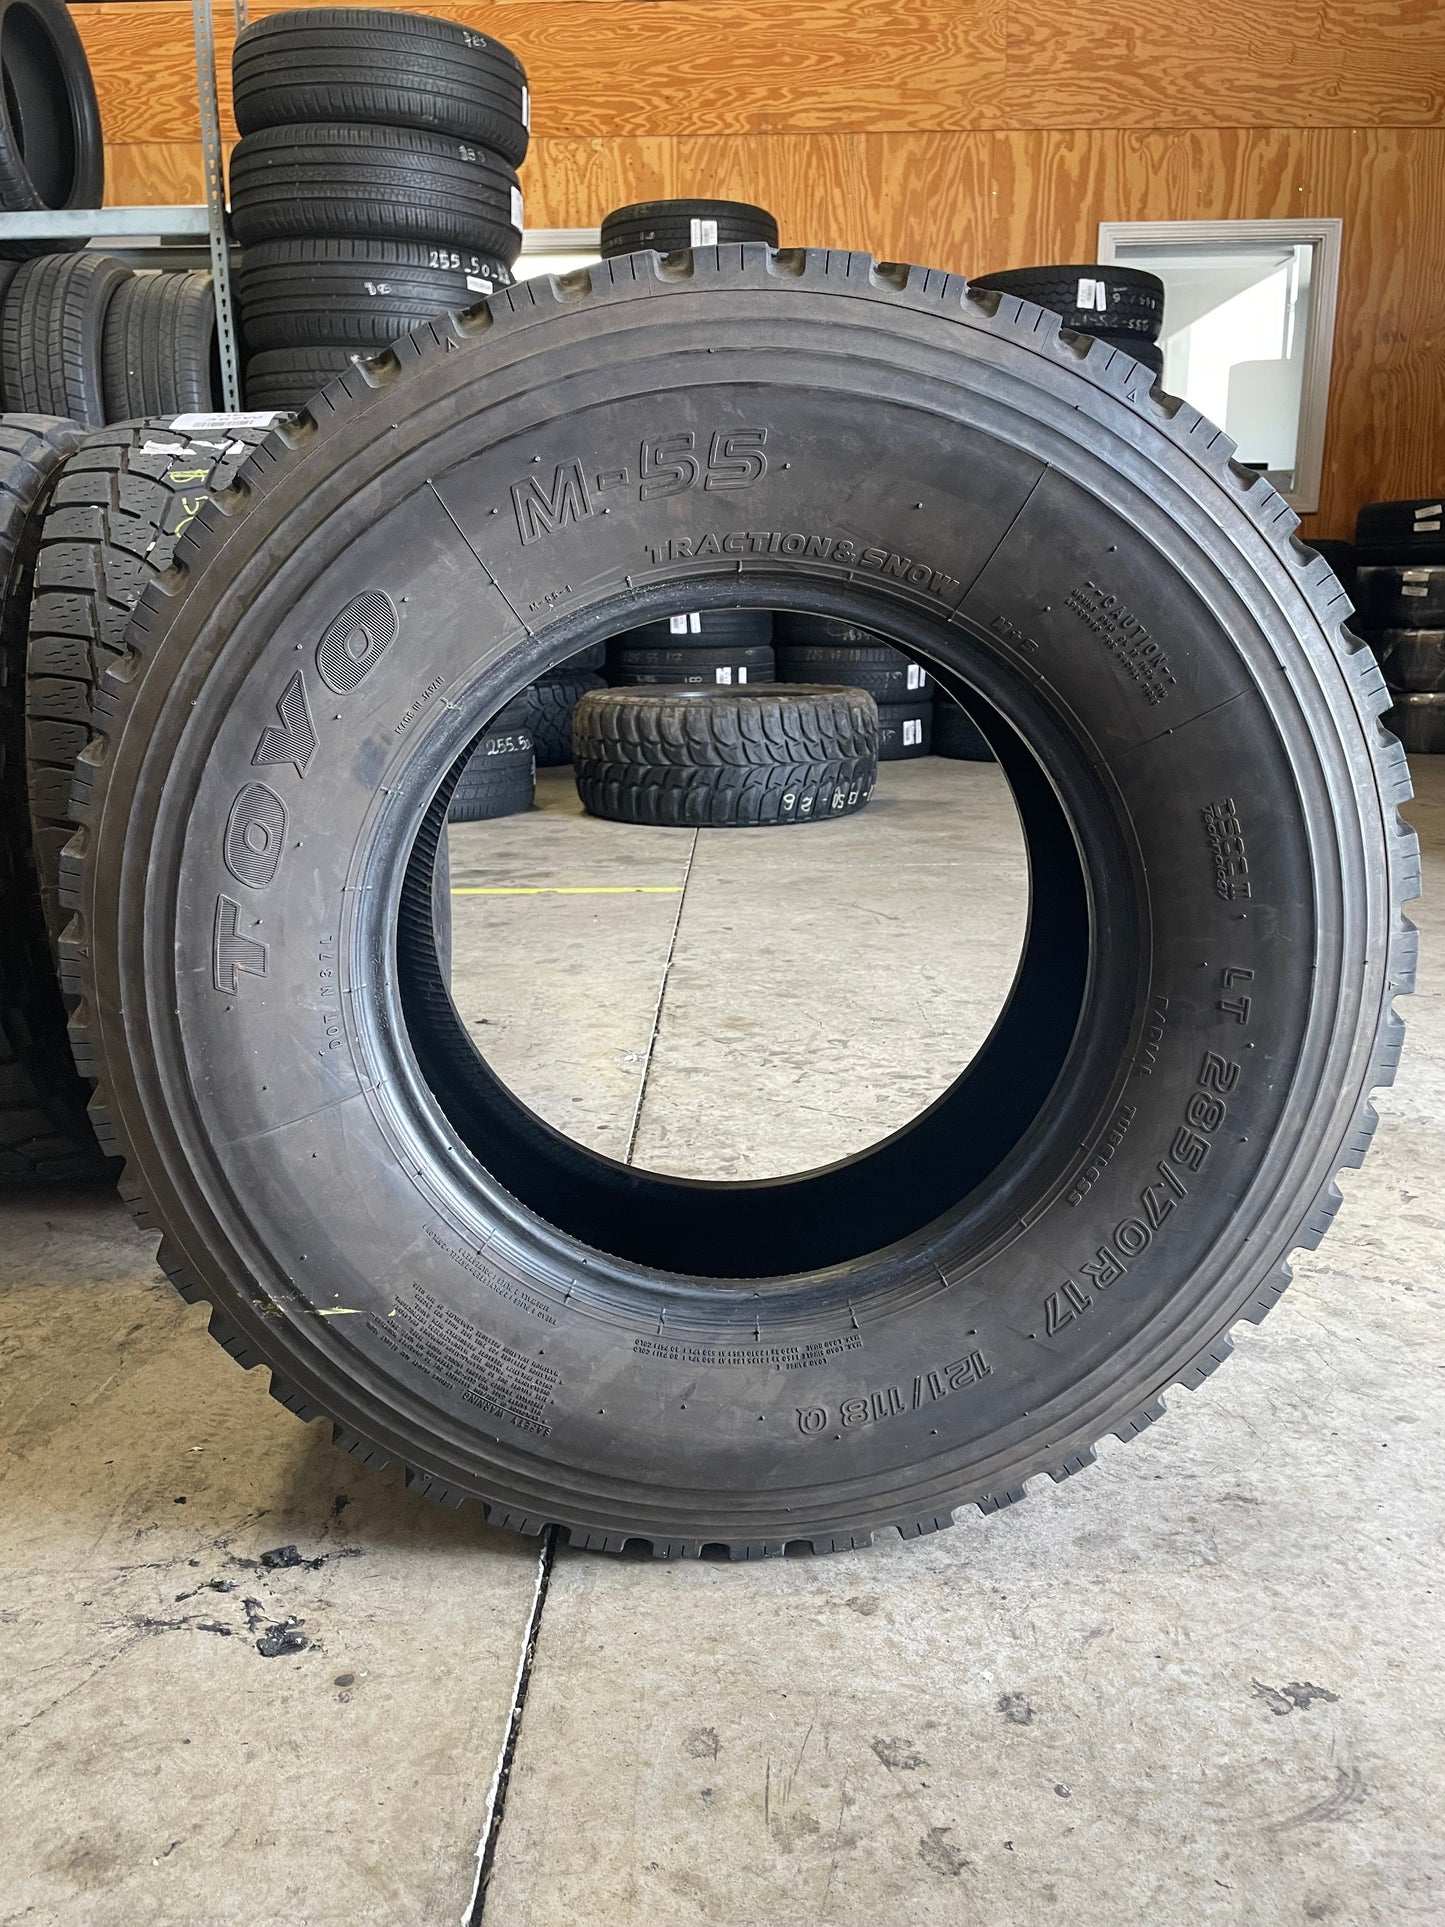 SINGLE 285/70R17 Toyo M-55 DSOC2 Technology 121/118 Q E - Used Tires